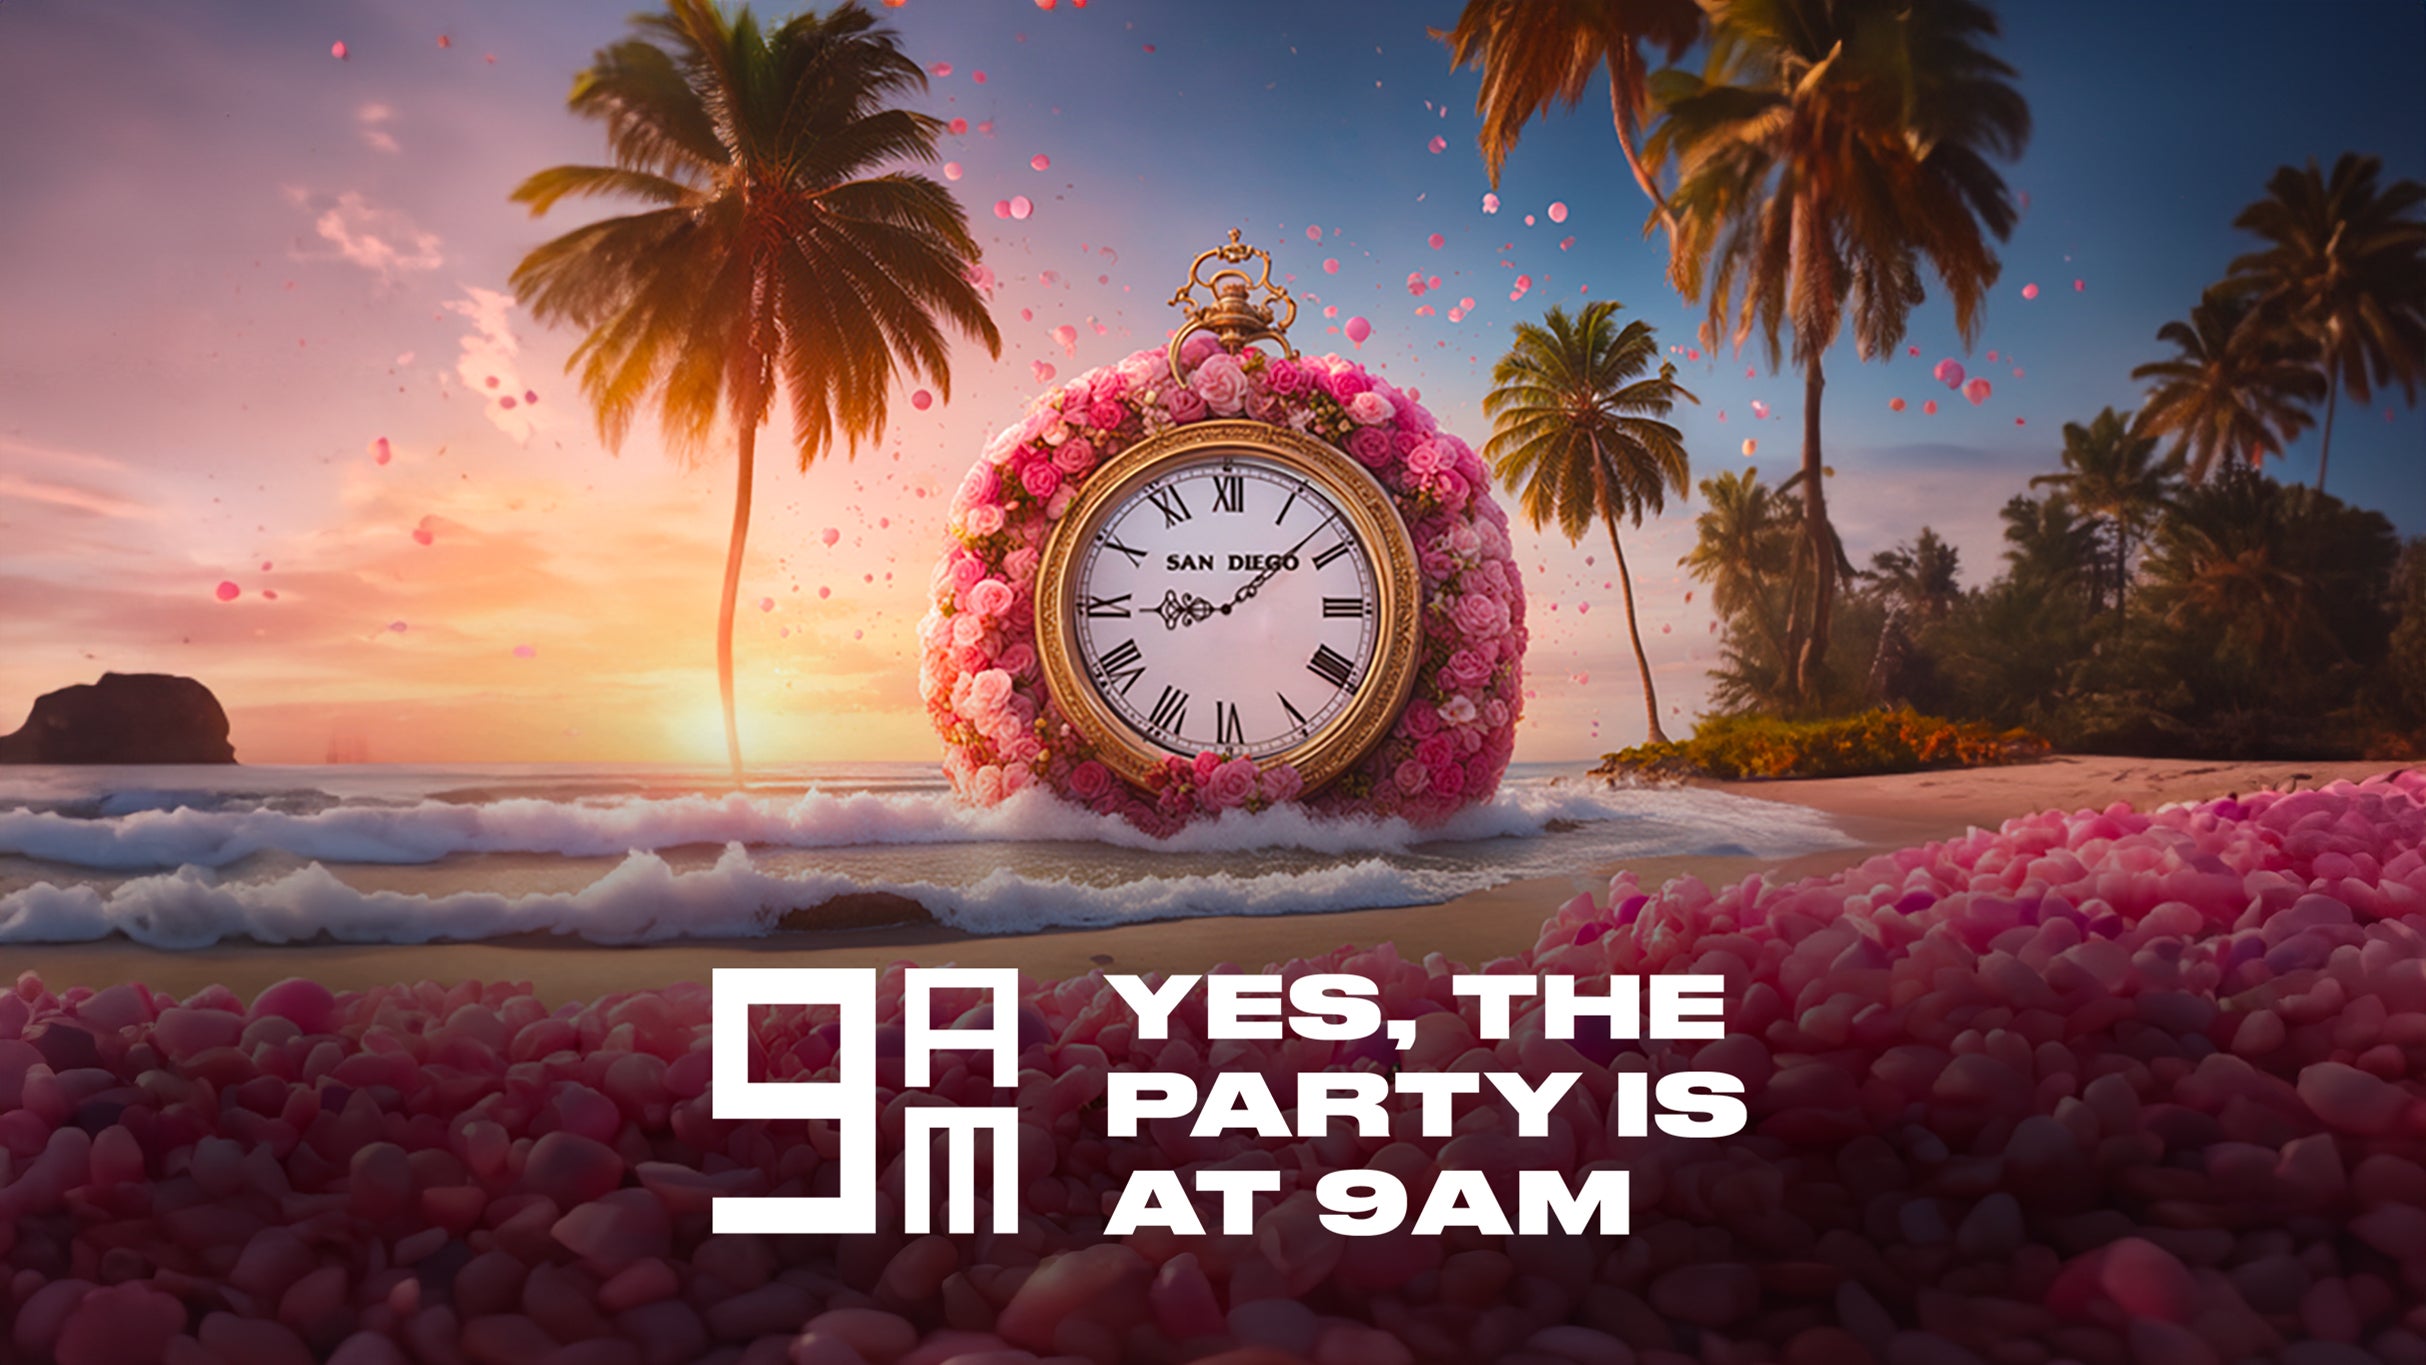 THE 9AM BANGER Presents: Rise and Rose'! Yes, The Party is at 9AM! 21+ in San Diego promo photo for Live Nation presale offer code